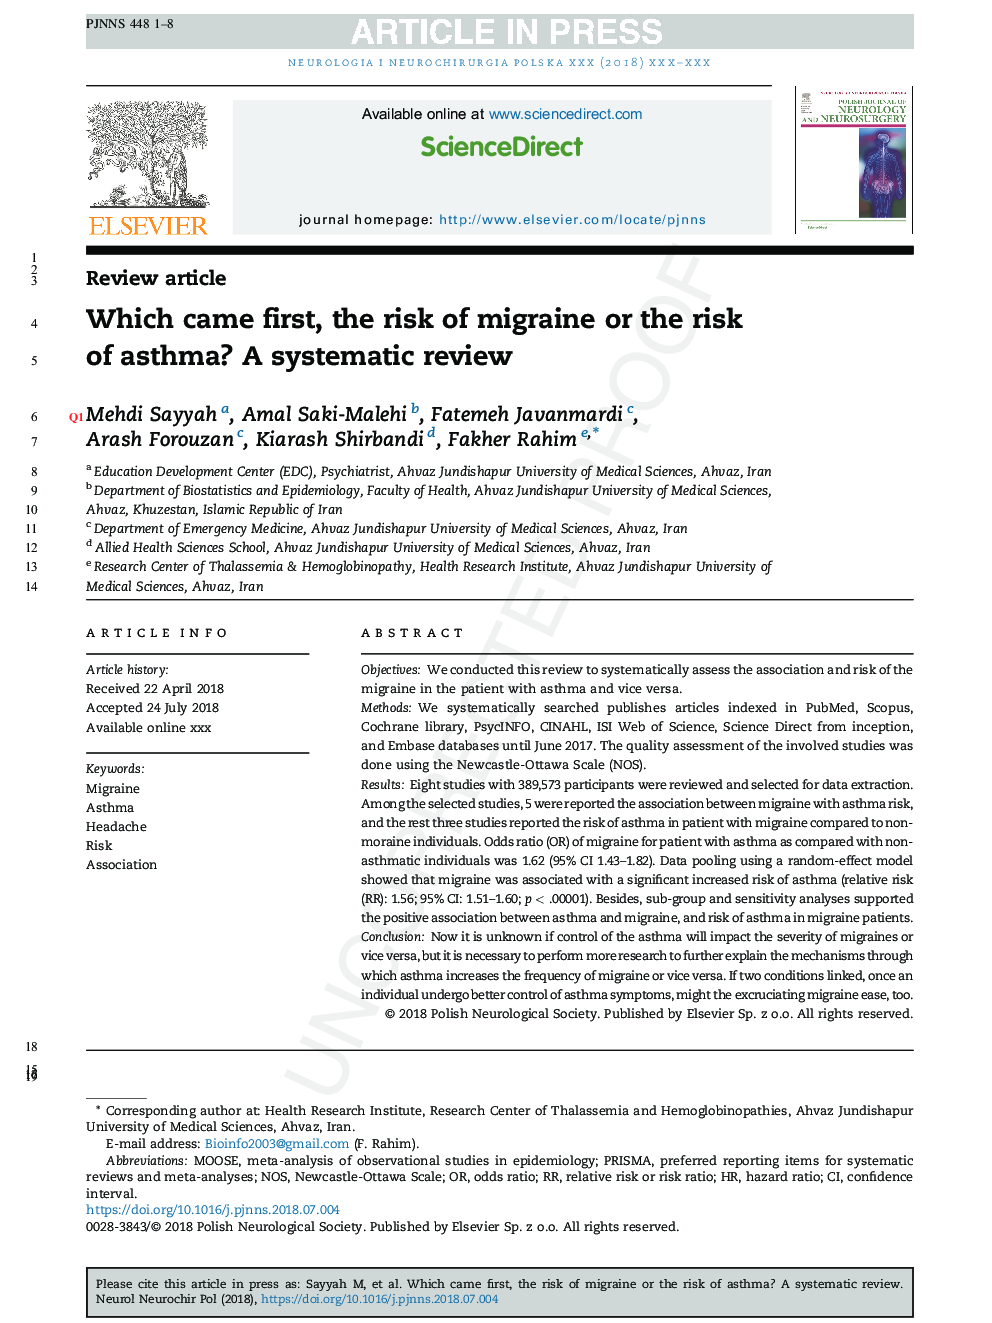 Which came first, the risk of migraine or the risk of asthma? A systematic review